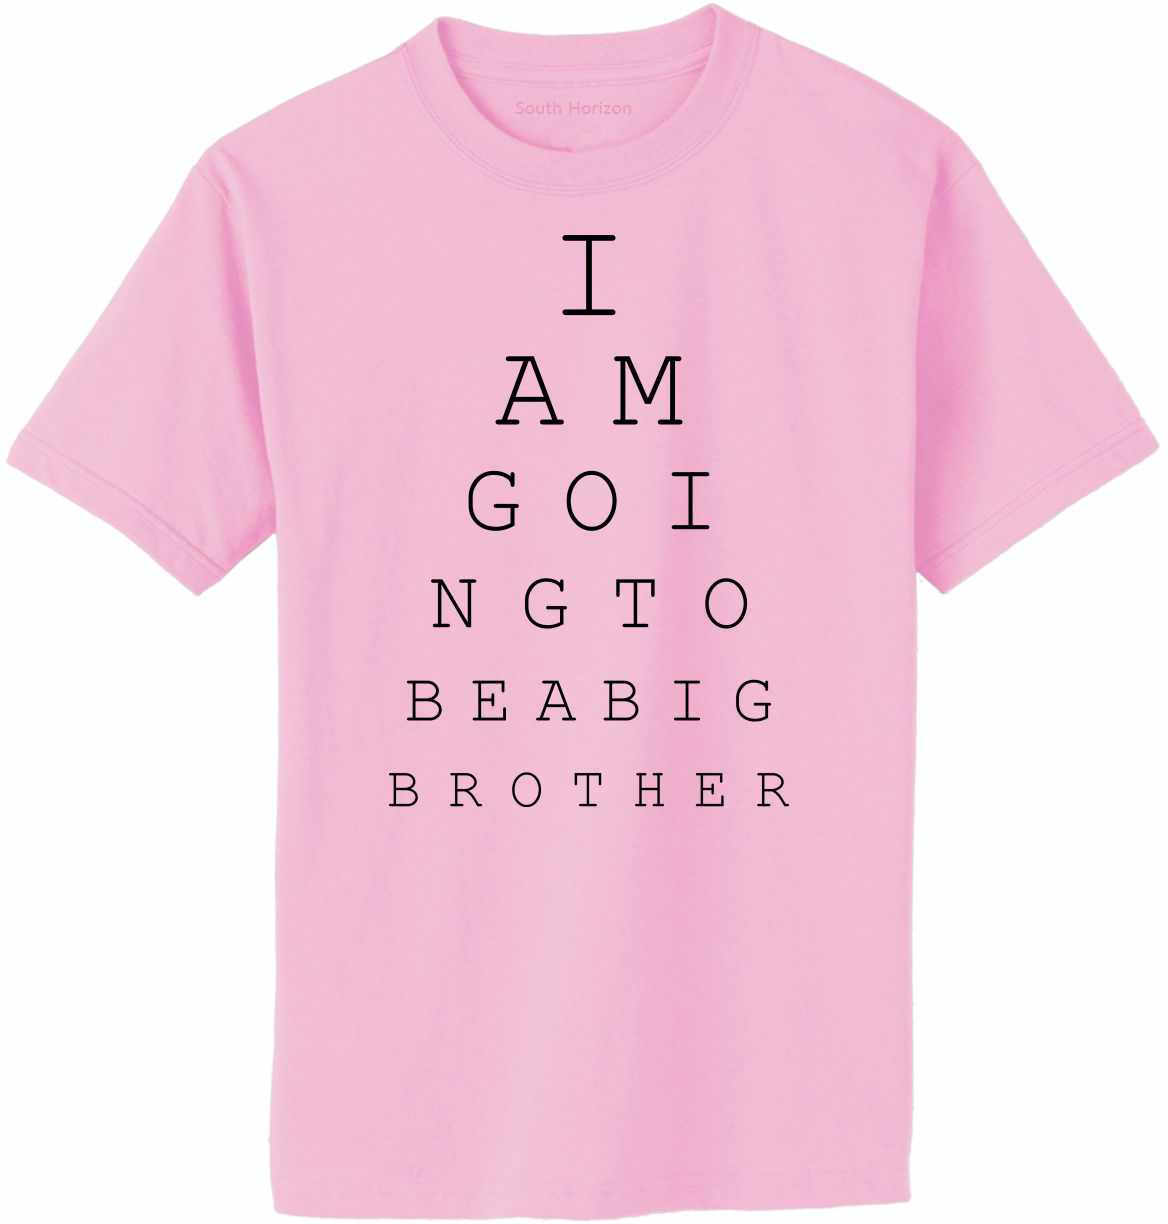 I AM GOING TO BE BIG BROTHER EYE CHART Adult T-Shirt